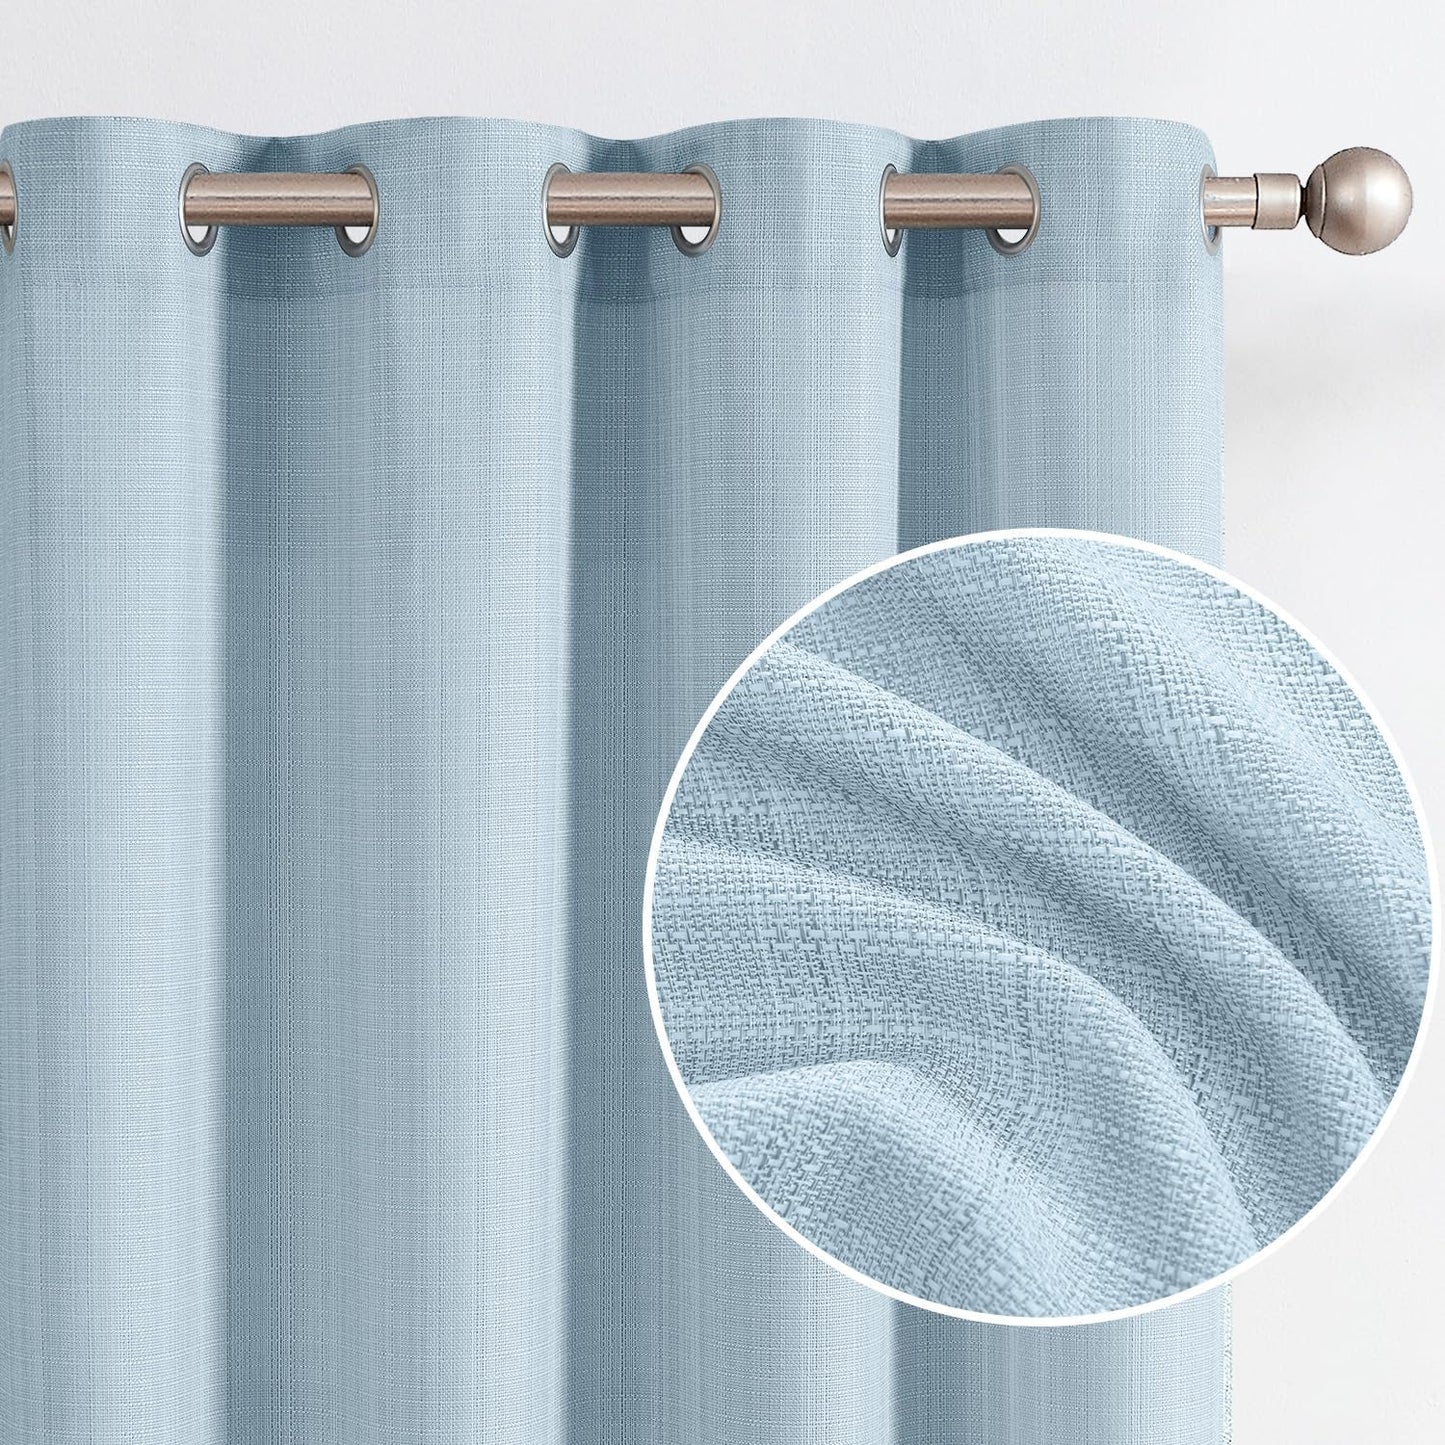 Jinchan Curtains for Bedroom Living Room 84 Inch Long Room Darkening Farmhouse Country Window Curtains Heathered Denim Blue Curtains Grommet Curtains Drapes 2 Panels  CKNY HOME FASHION Grommet Heathered Sky Blue 50"W X 84"L 